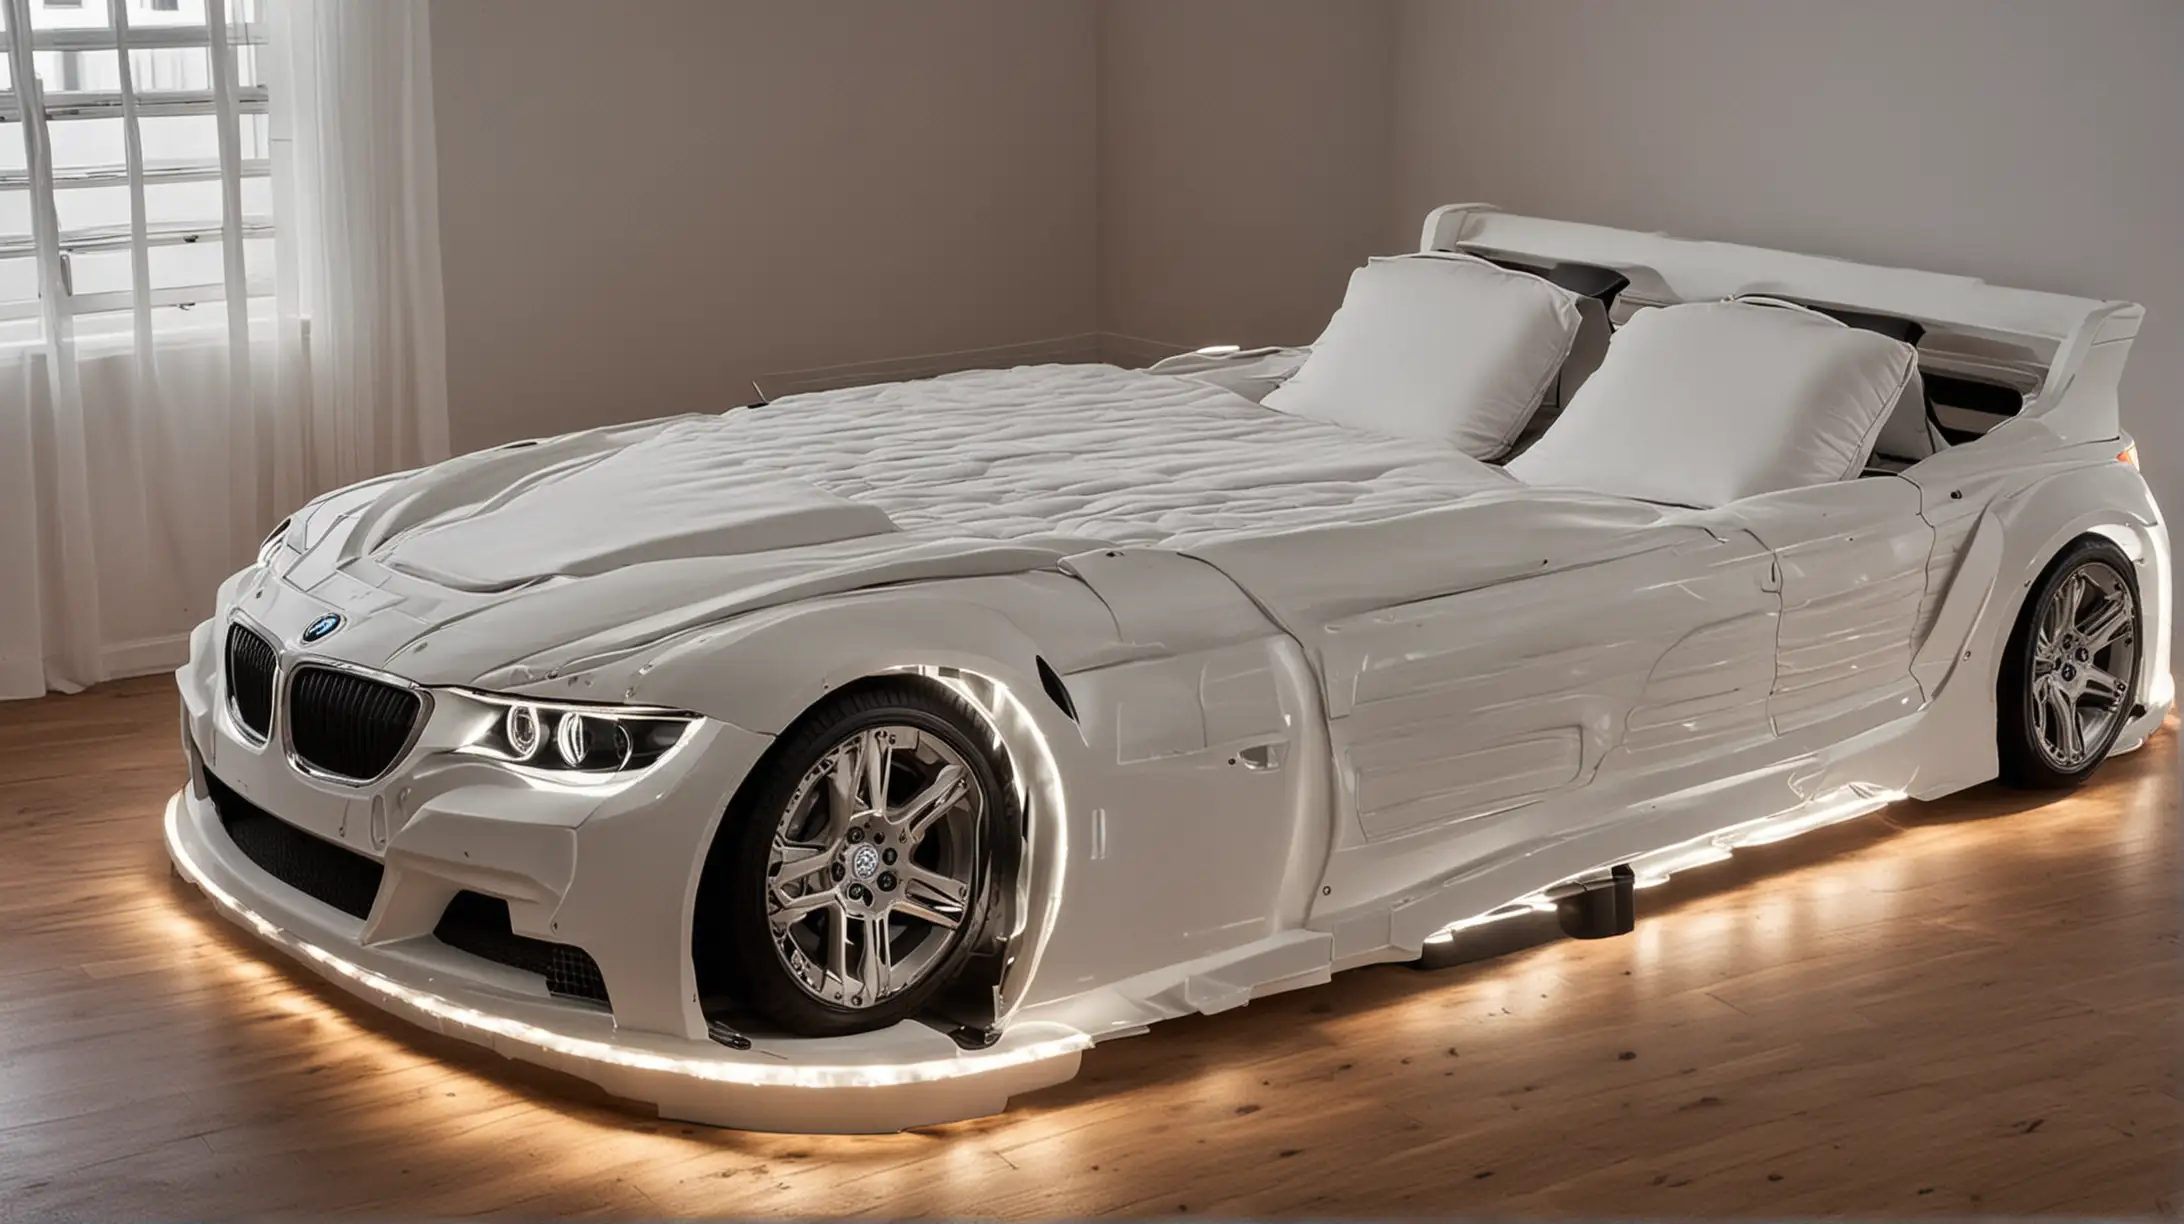 Luxury Double Bed Shaped as BMW Car with Illuminated Headlights